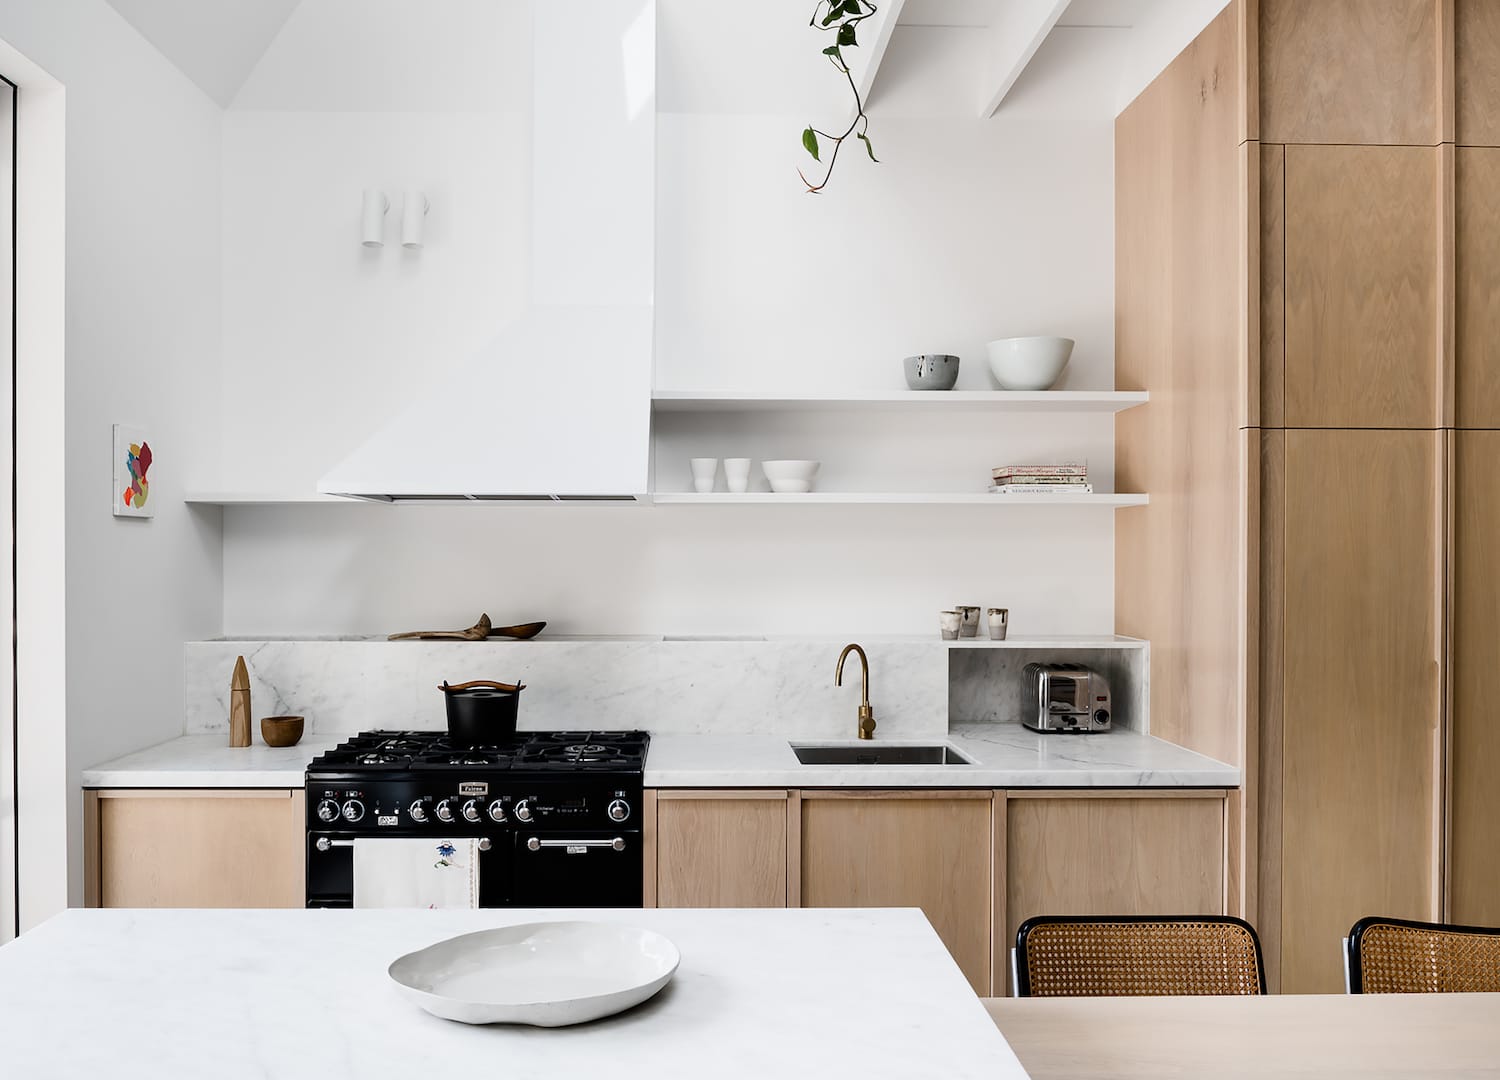 Storybook House by Folk Architects. Phtography by Tom Blachford. Landscape image of residential kitchen. Light timber cabinetry. White walls. Subtle marble countertop and splashback. Black oven and brass tapware. 